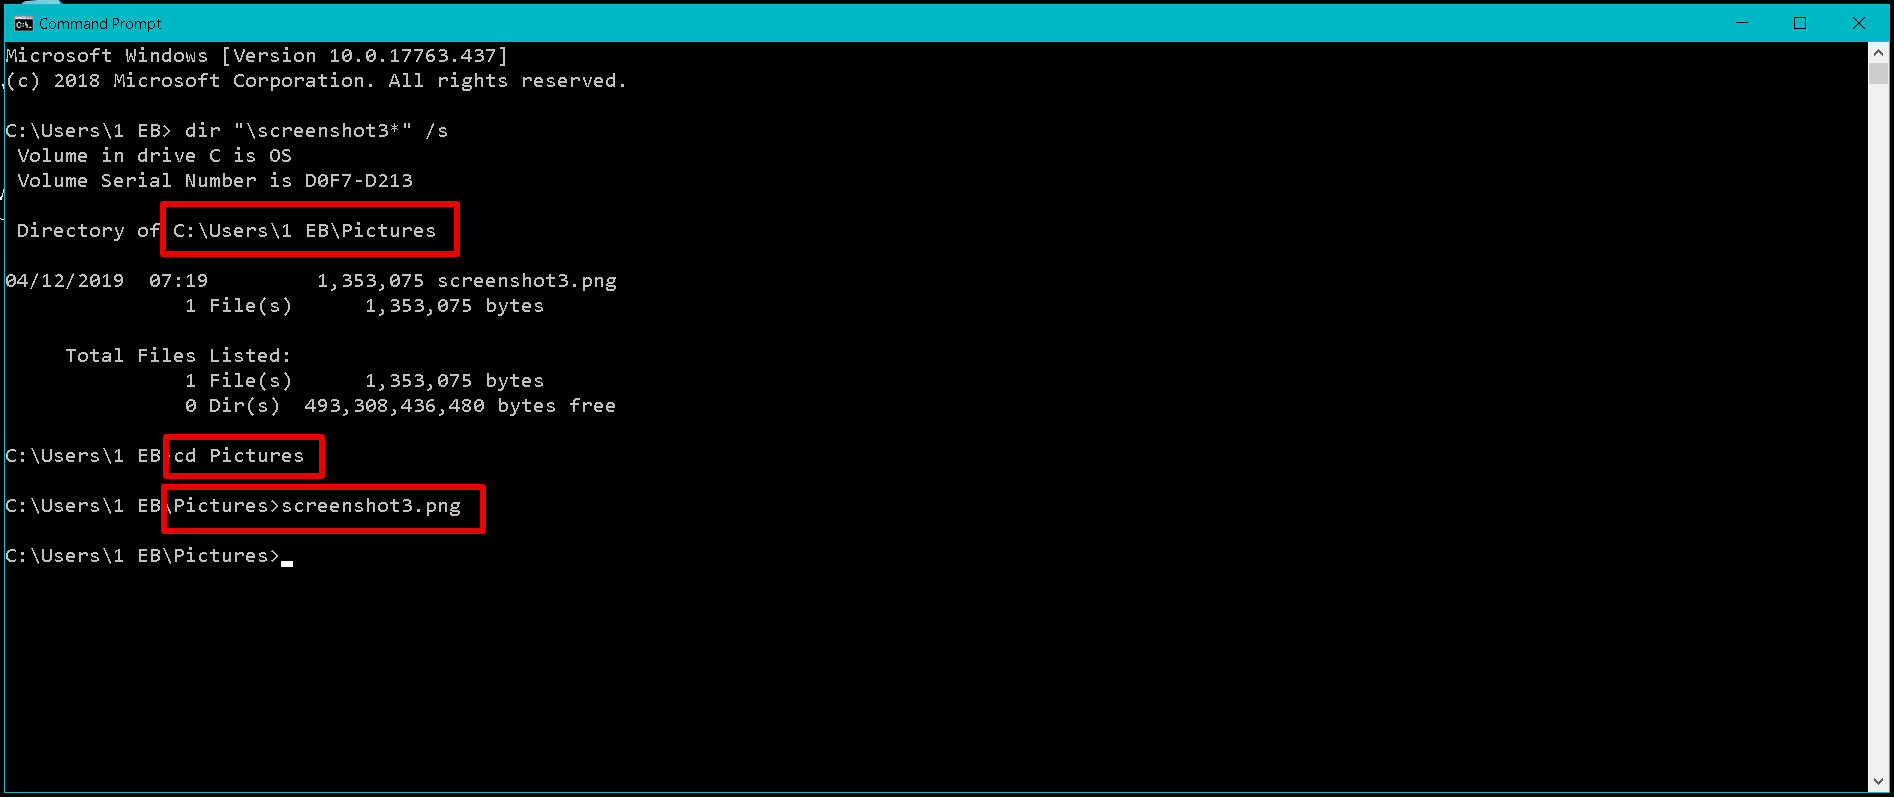 list files in command prompt windows 10